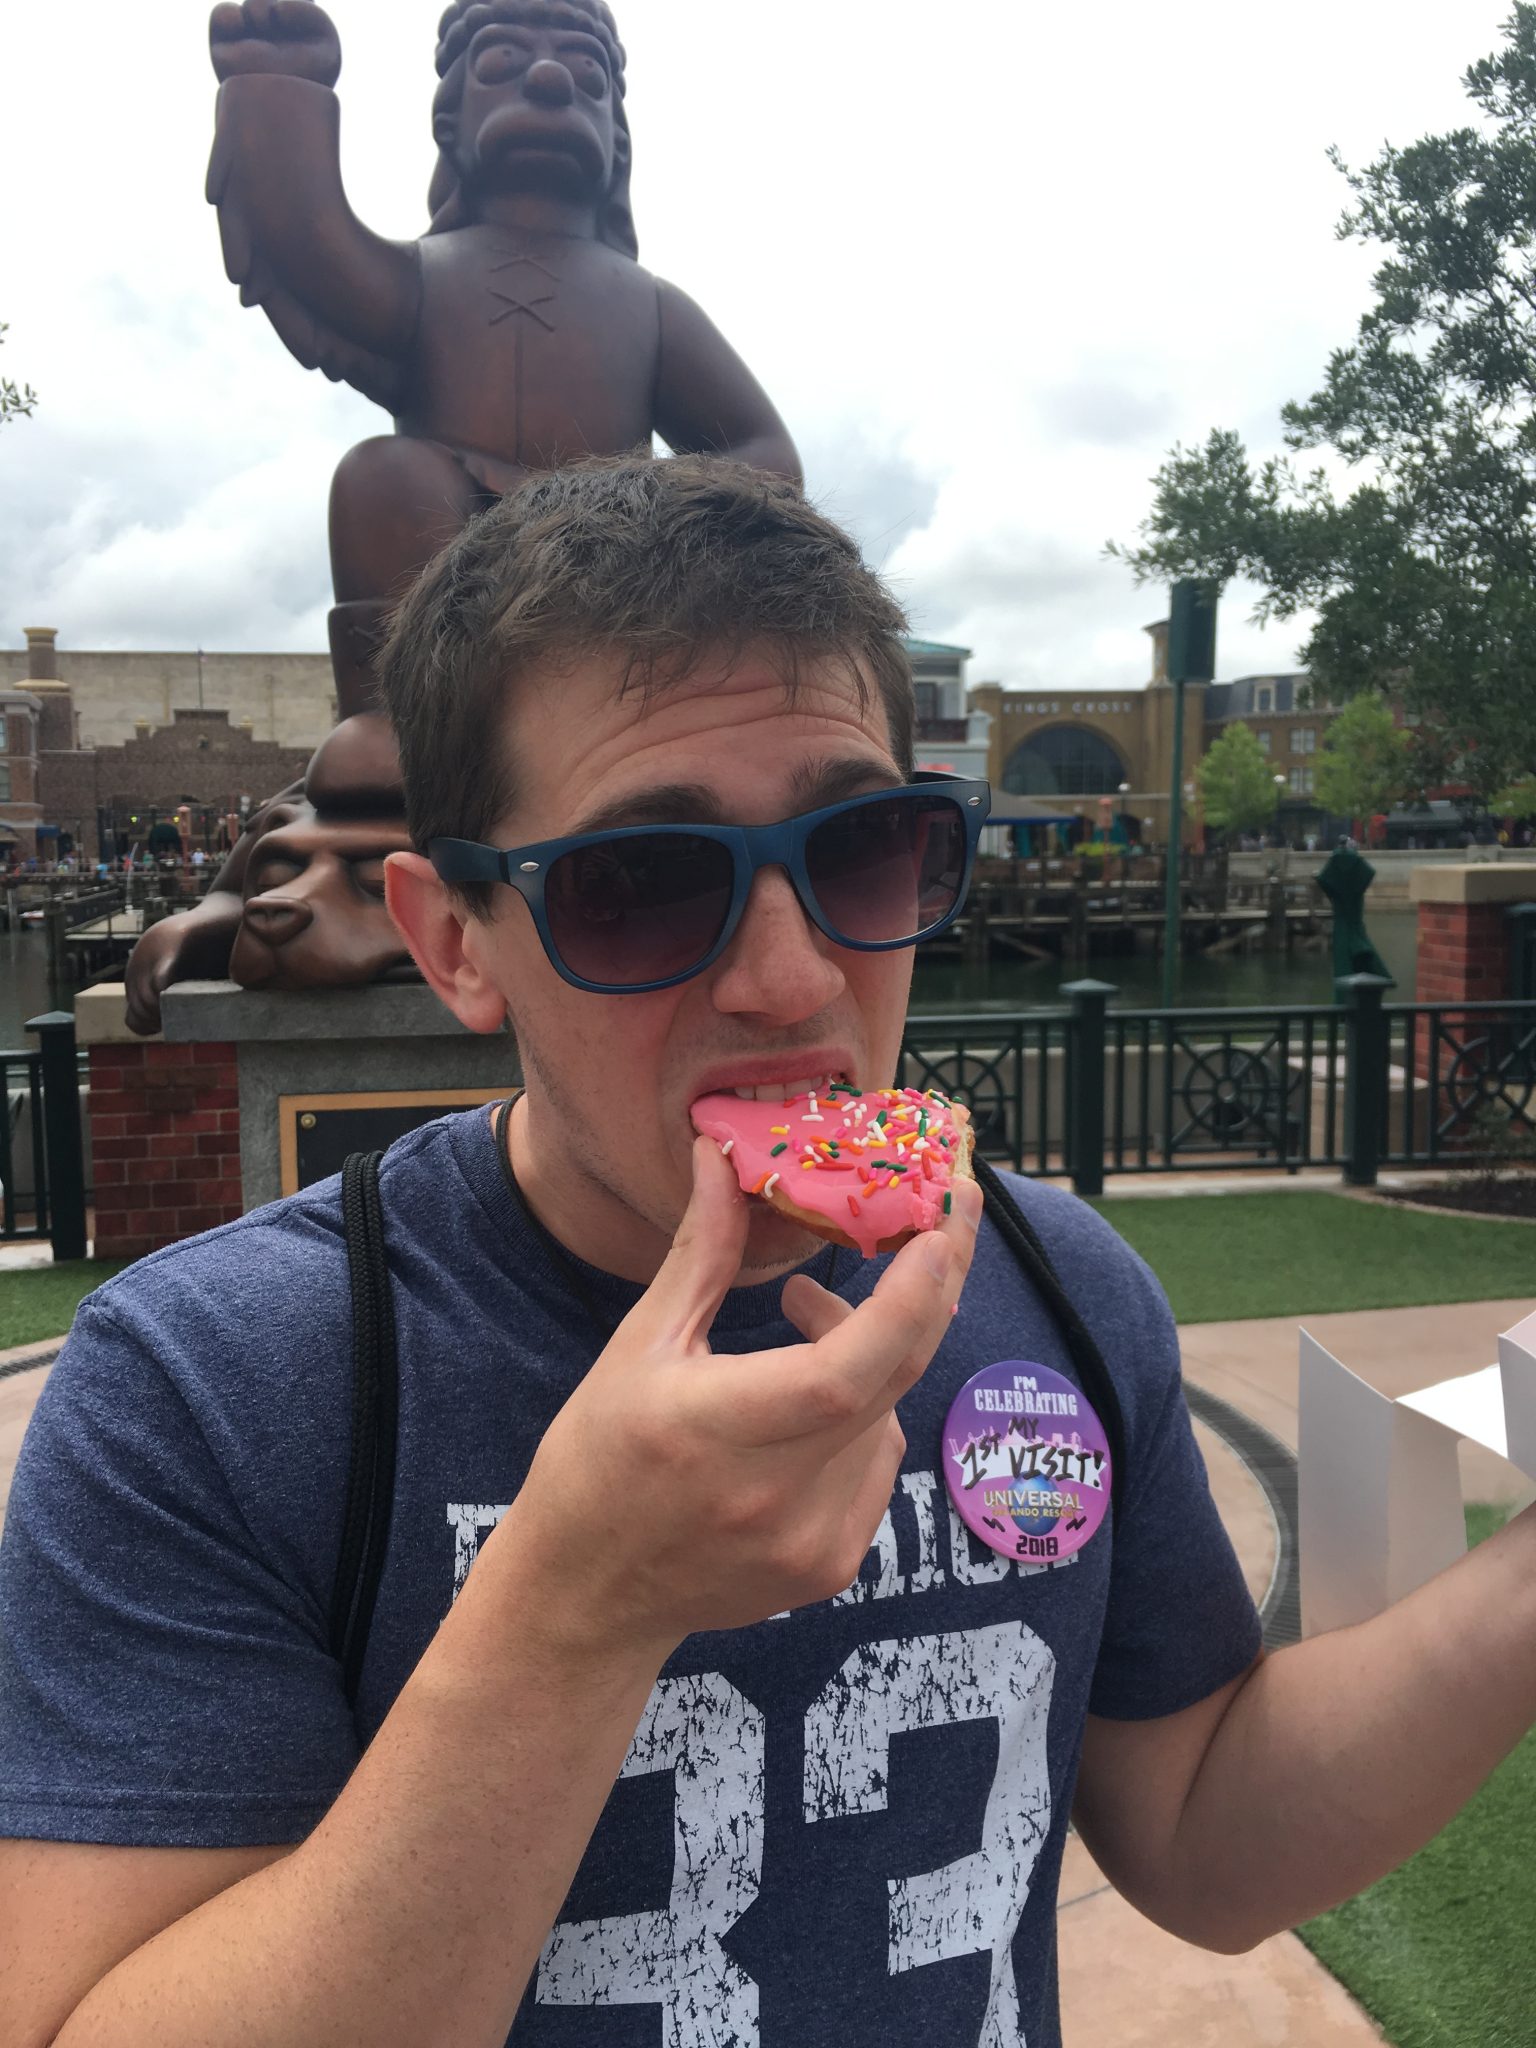 Robby eating one of the Simpsons' doughnuts.